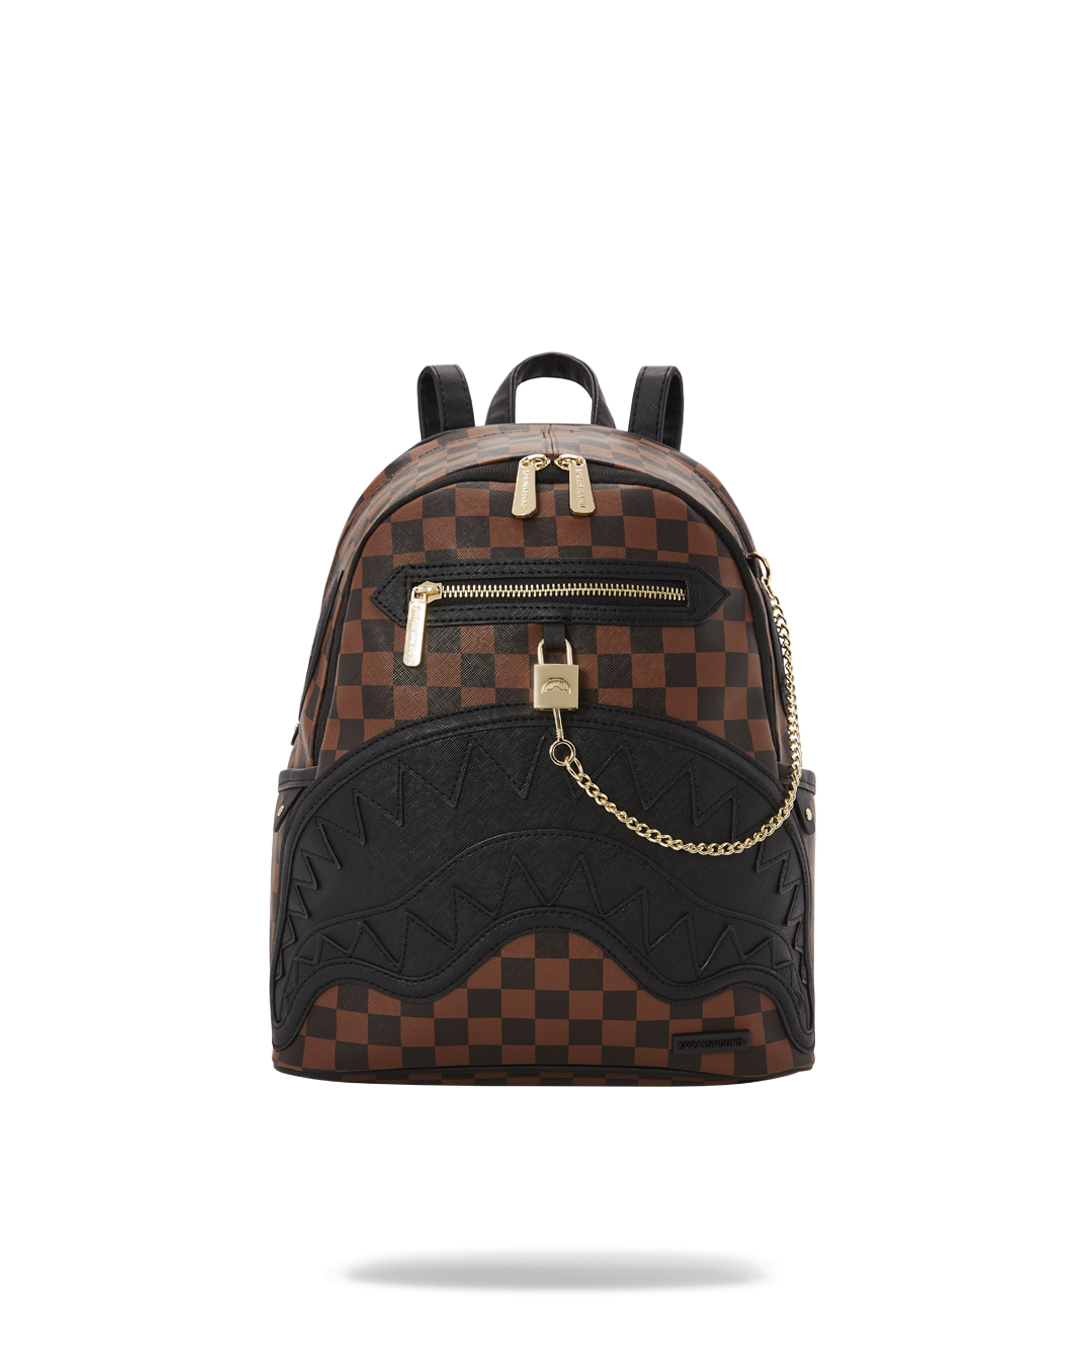 SPRAYGROUND Backpack Henny Lock Savage Sharks In Paris Chain Bag Limited  Edition